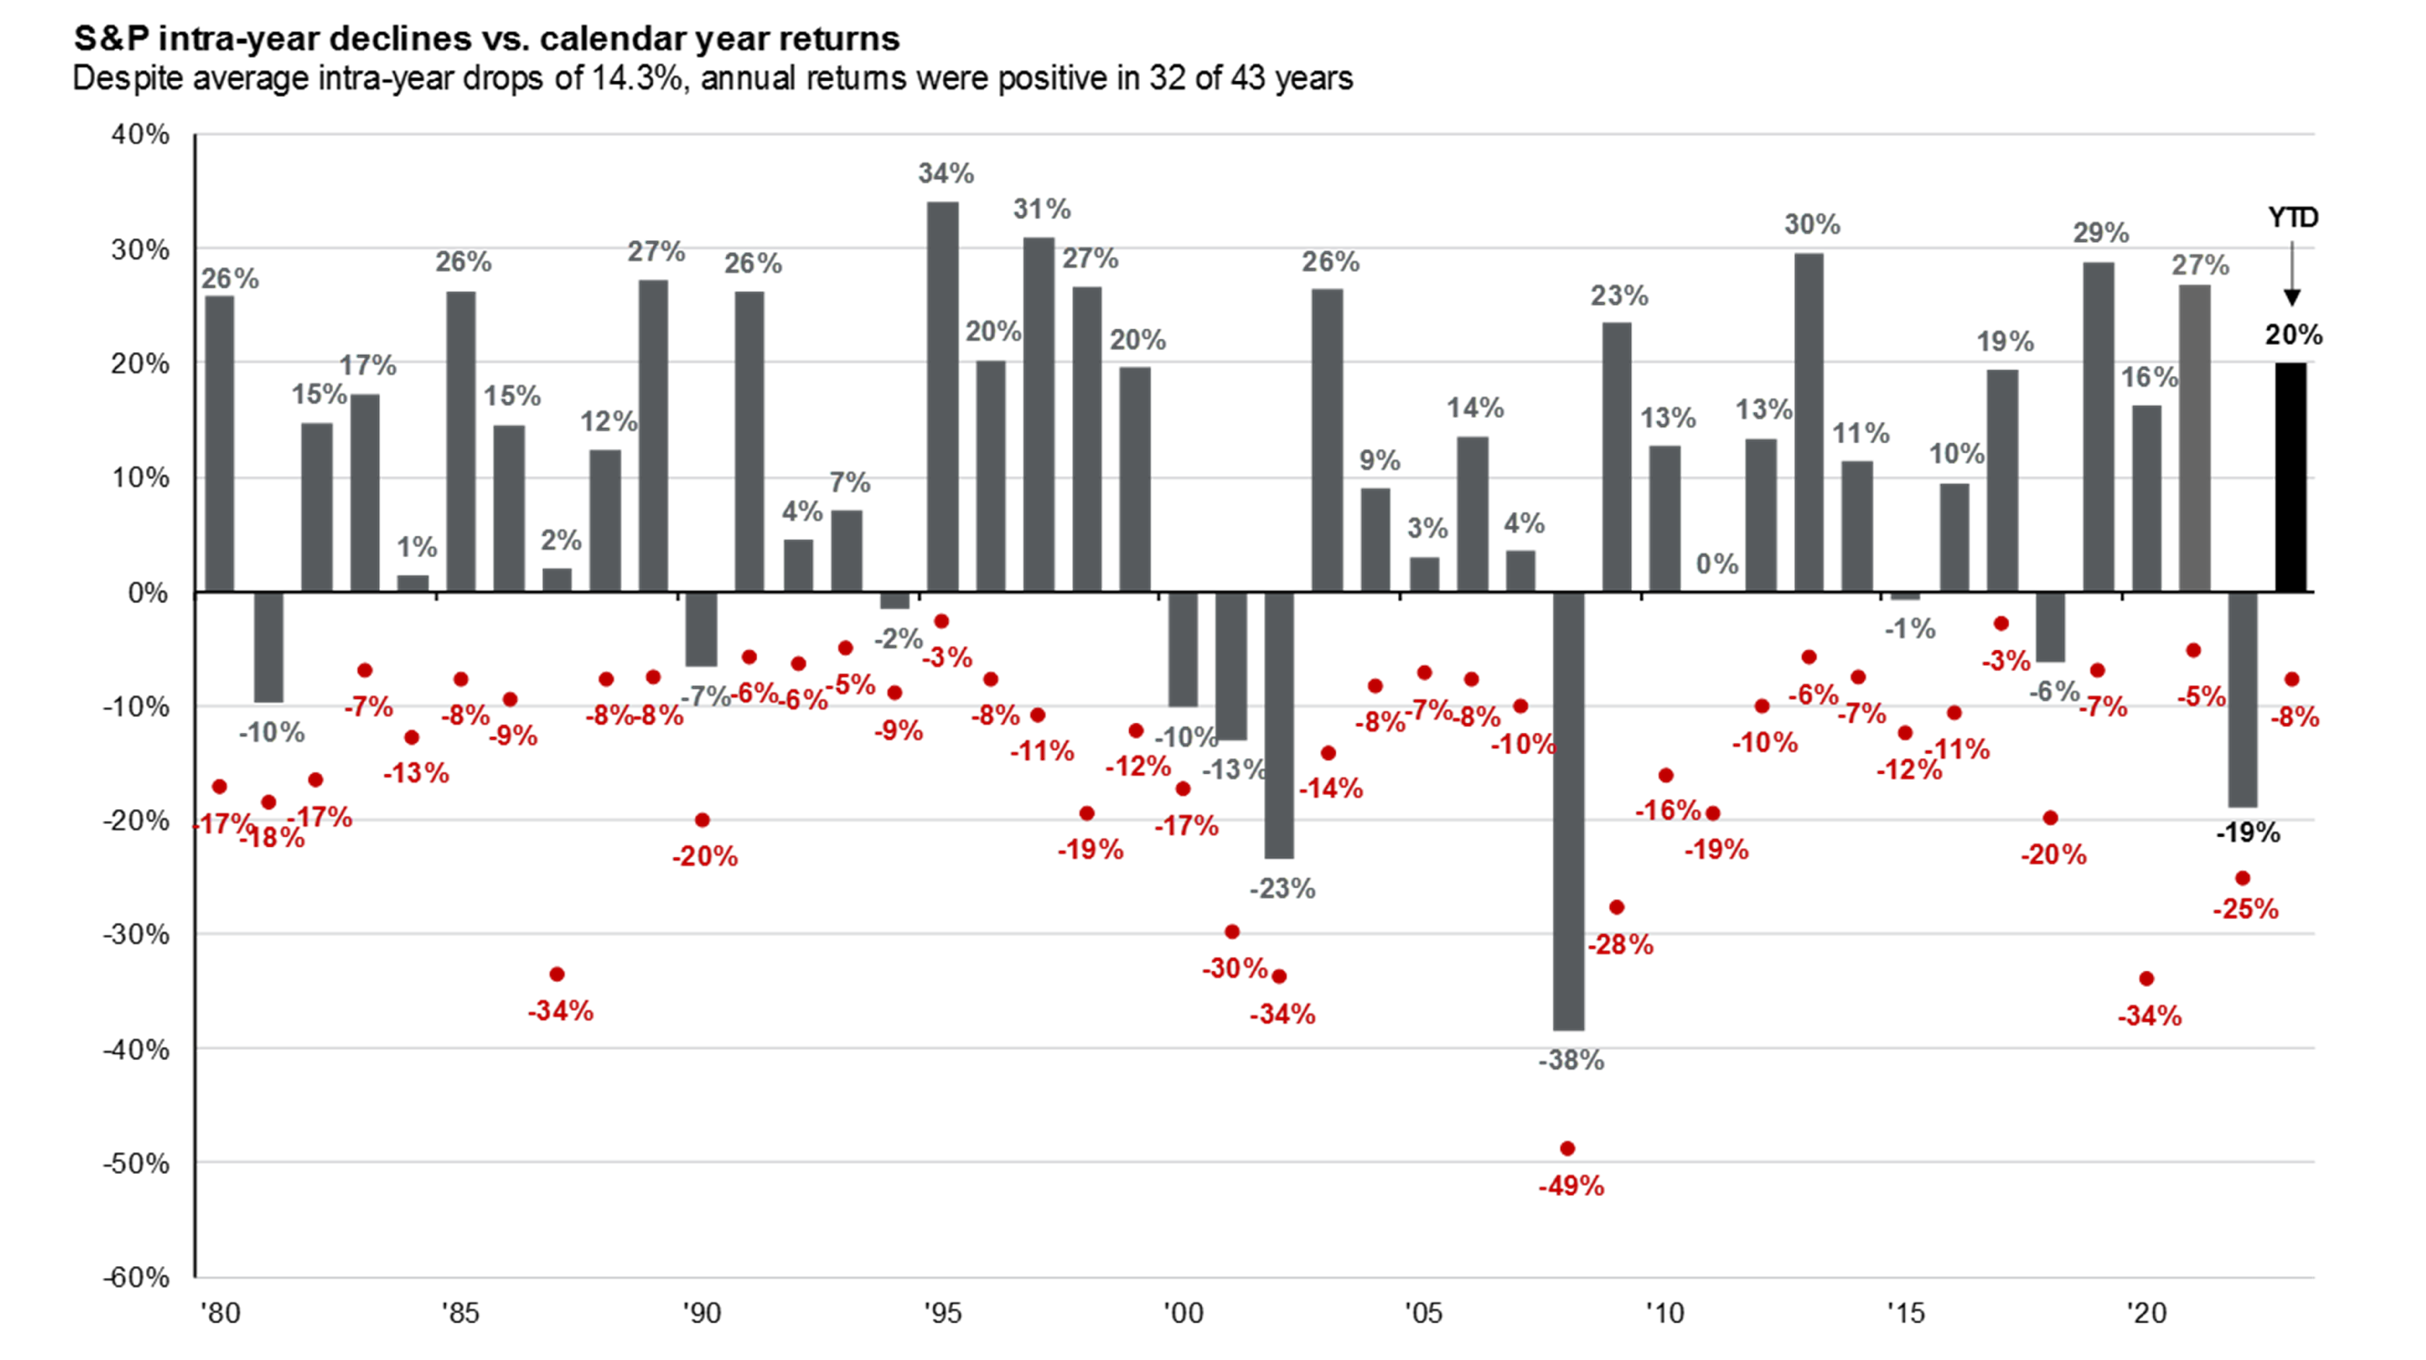 Chart of S&P 500 intra-year declines vs. calendar year returns